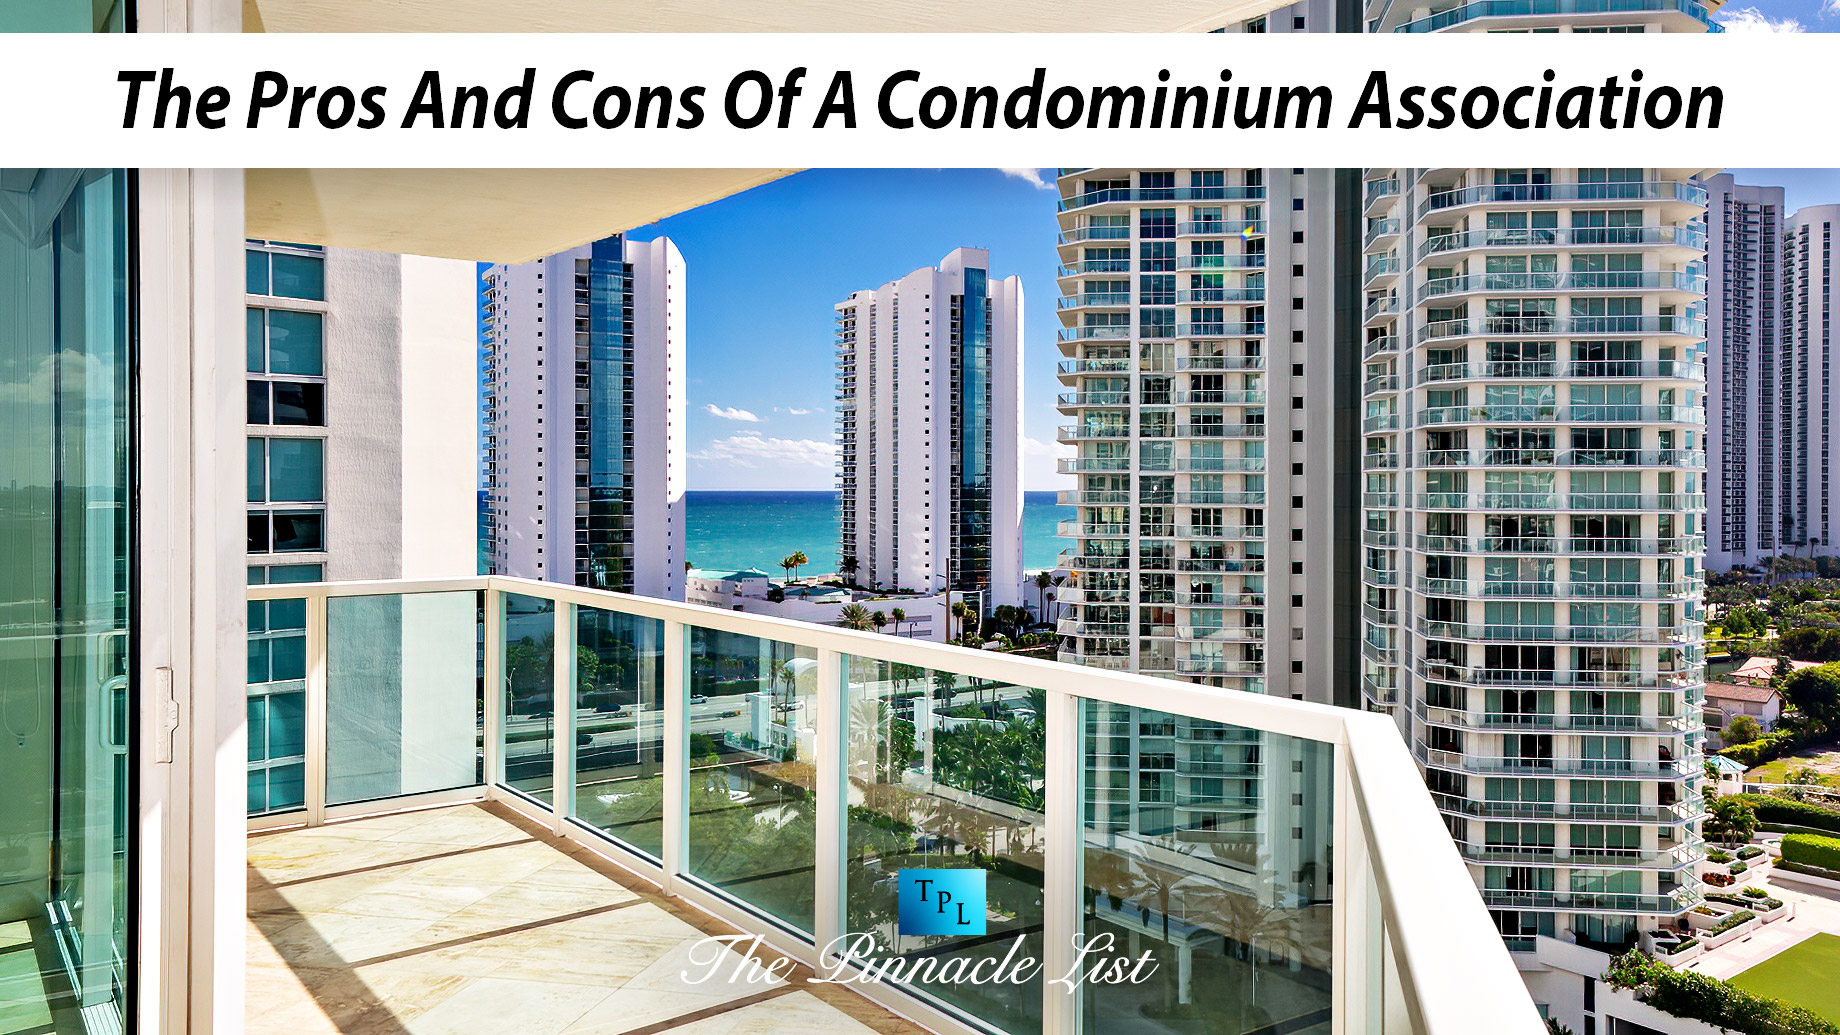 The Pros And Cons Of A Condominium Association